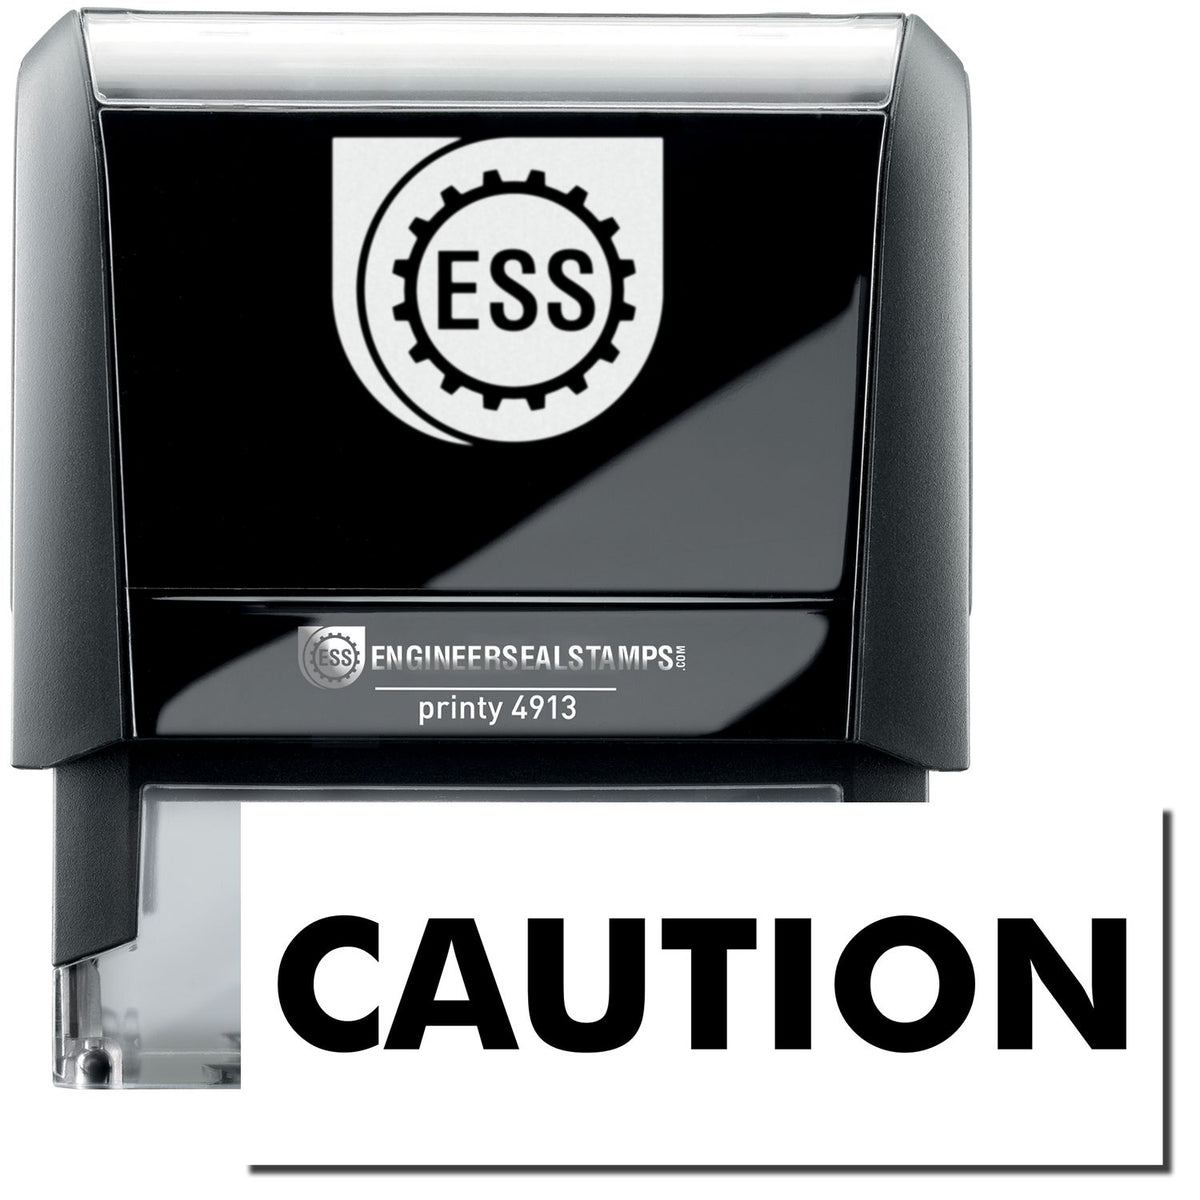 A self-inking stamp with a stamped image showing how the text &quot;CAUTION&quot; in a large bold font is displayed by it.